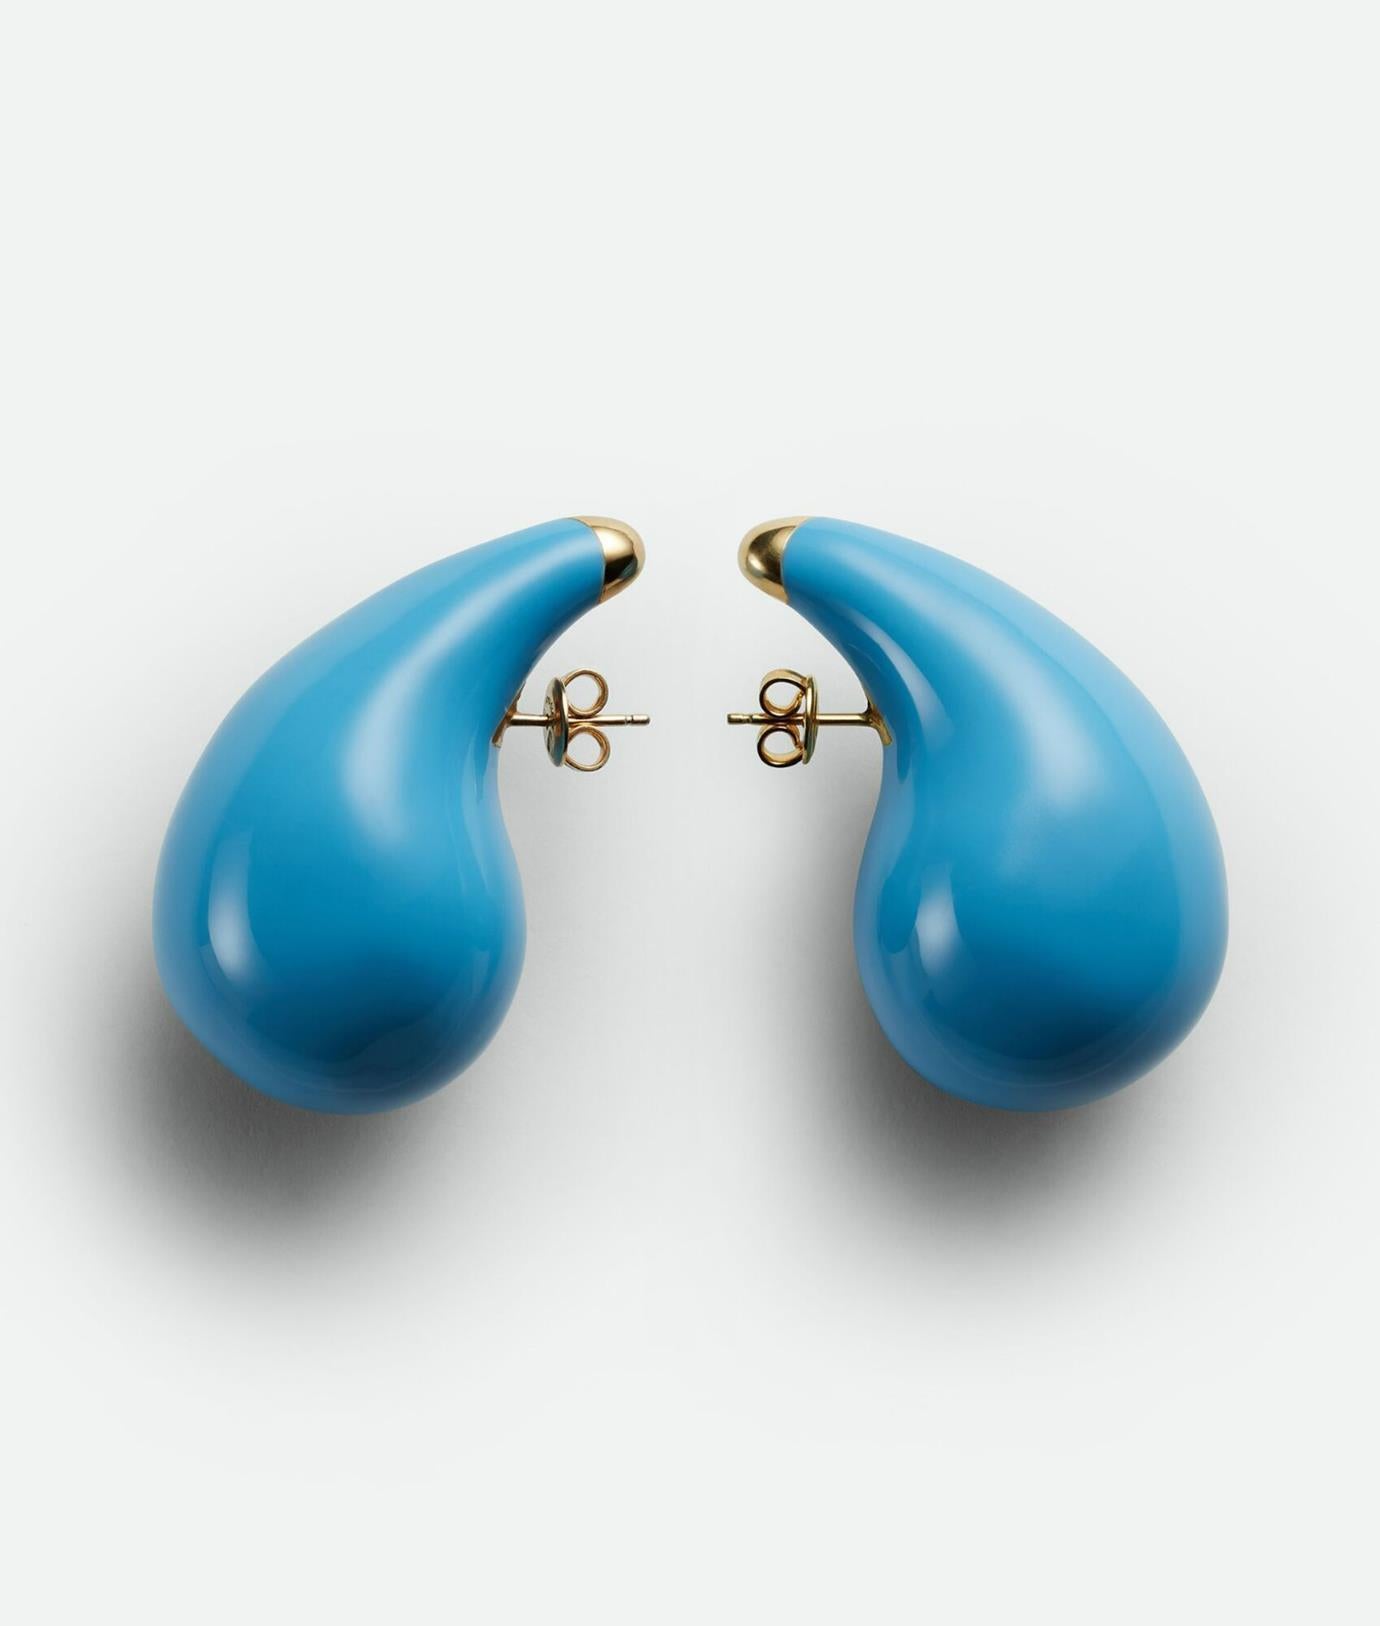 Bottega Veneta enamel and sterling silver earrings. Blue and gold. Butterfly fastening at back. Comes with dustbag and box. Length: 2.1 in. Width: 1.1 in. New with box
